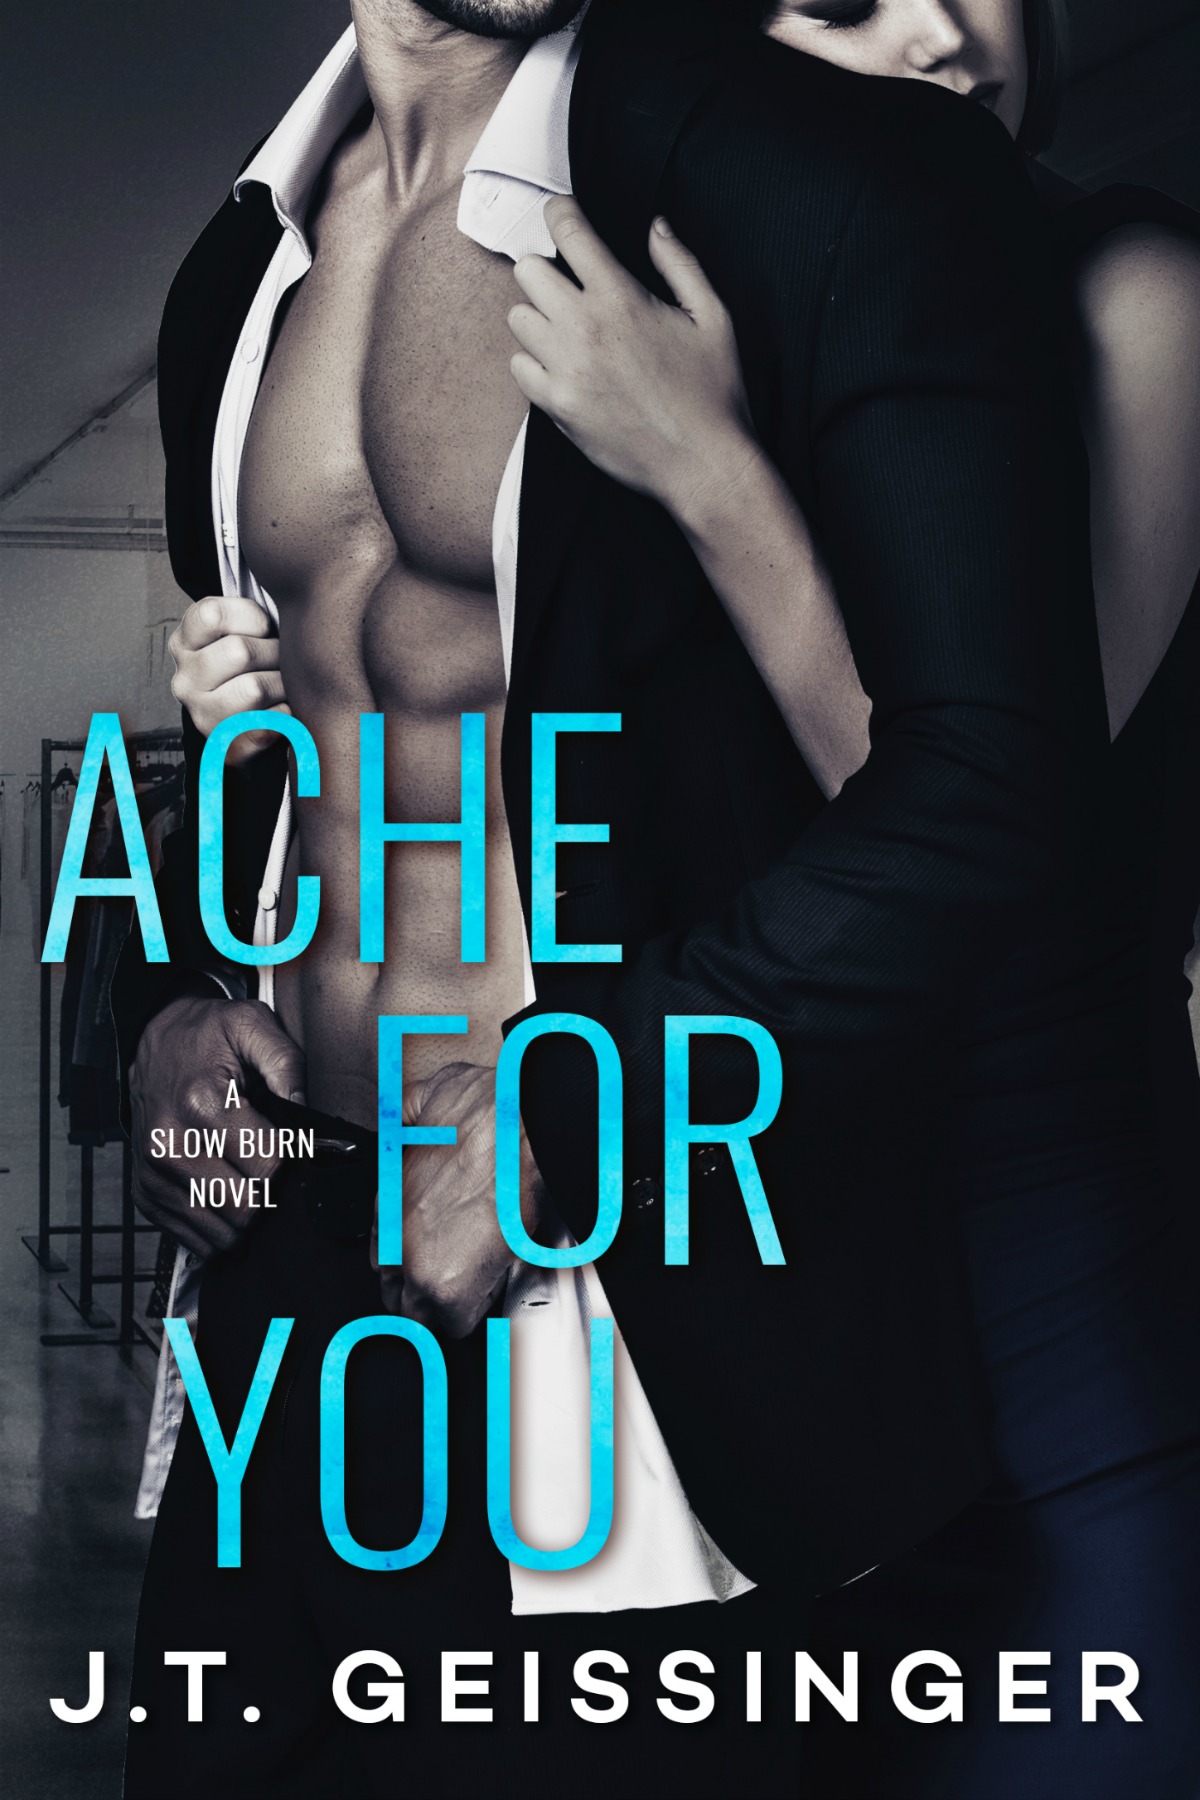 Ache For You by J.T. Geissinger [Release Blitz]